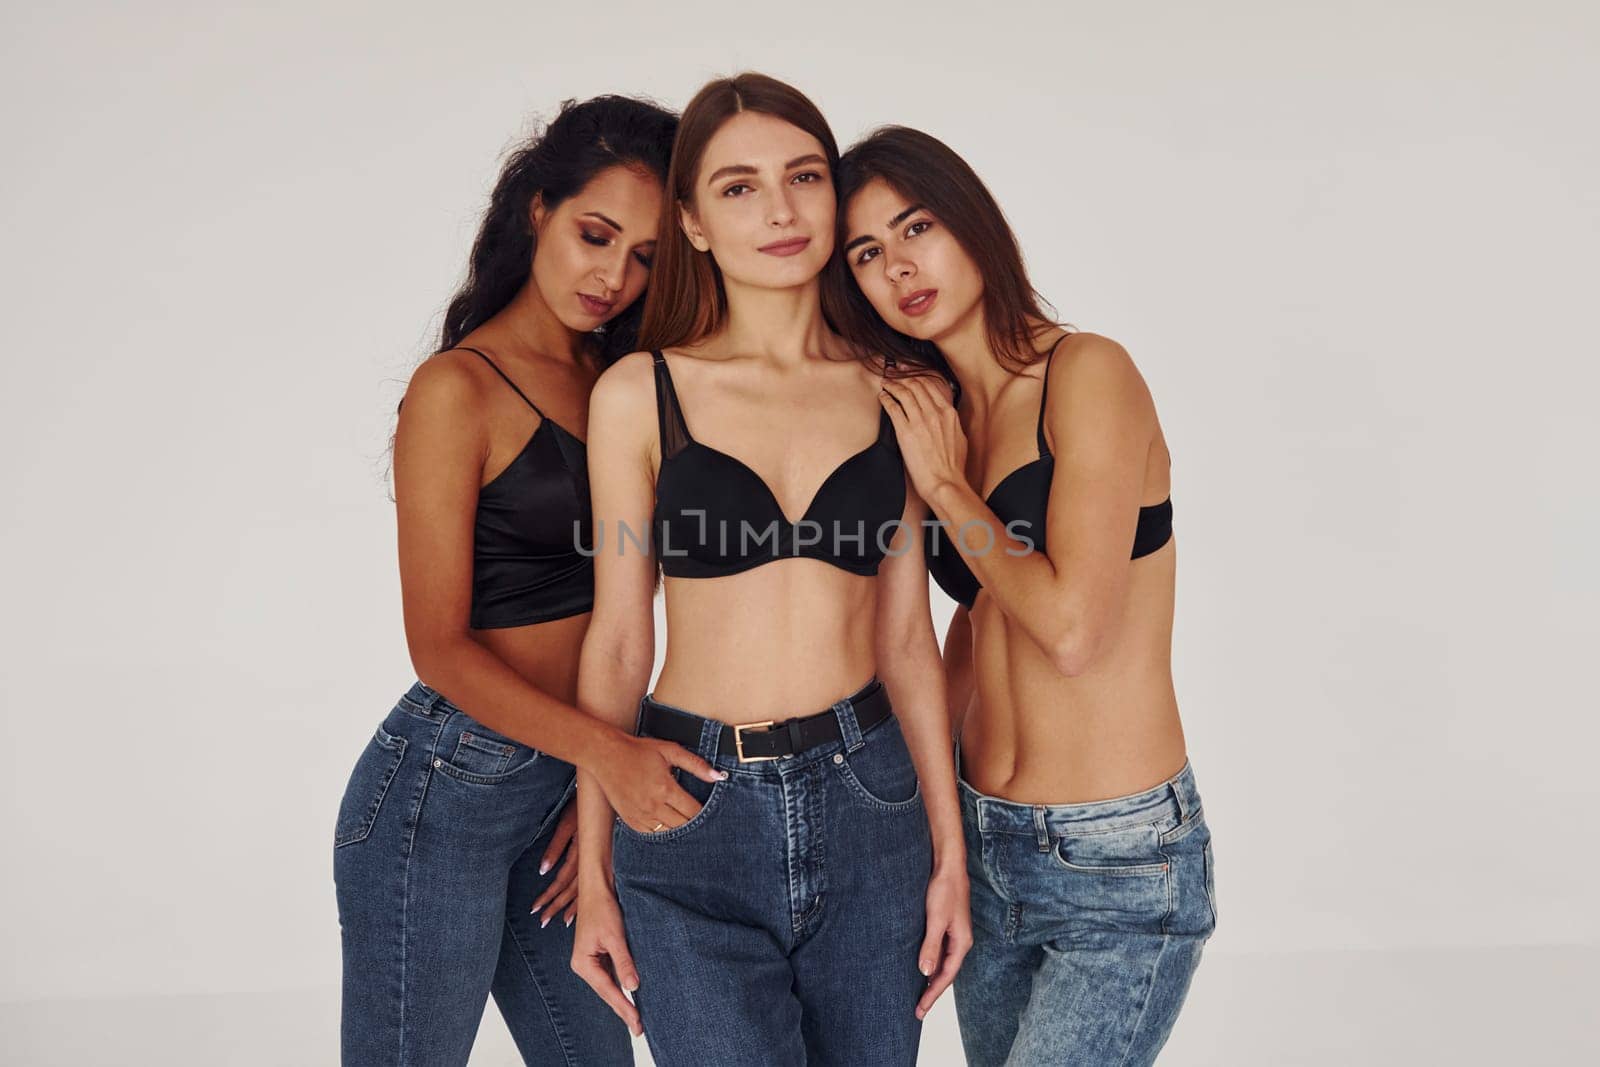 Embracing each other. Three young women in lingerie together indoors. White background.